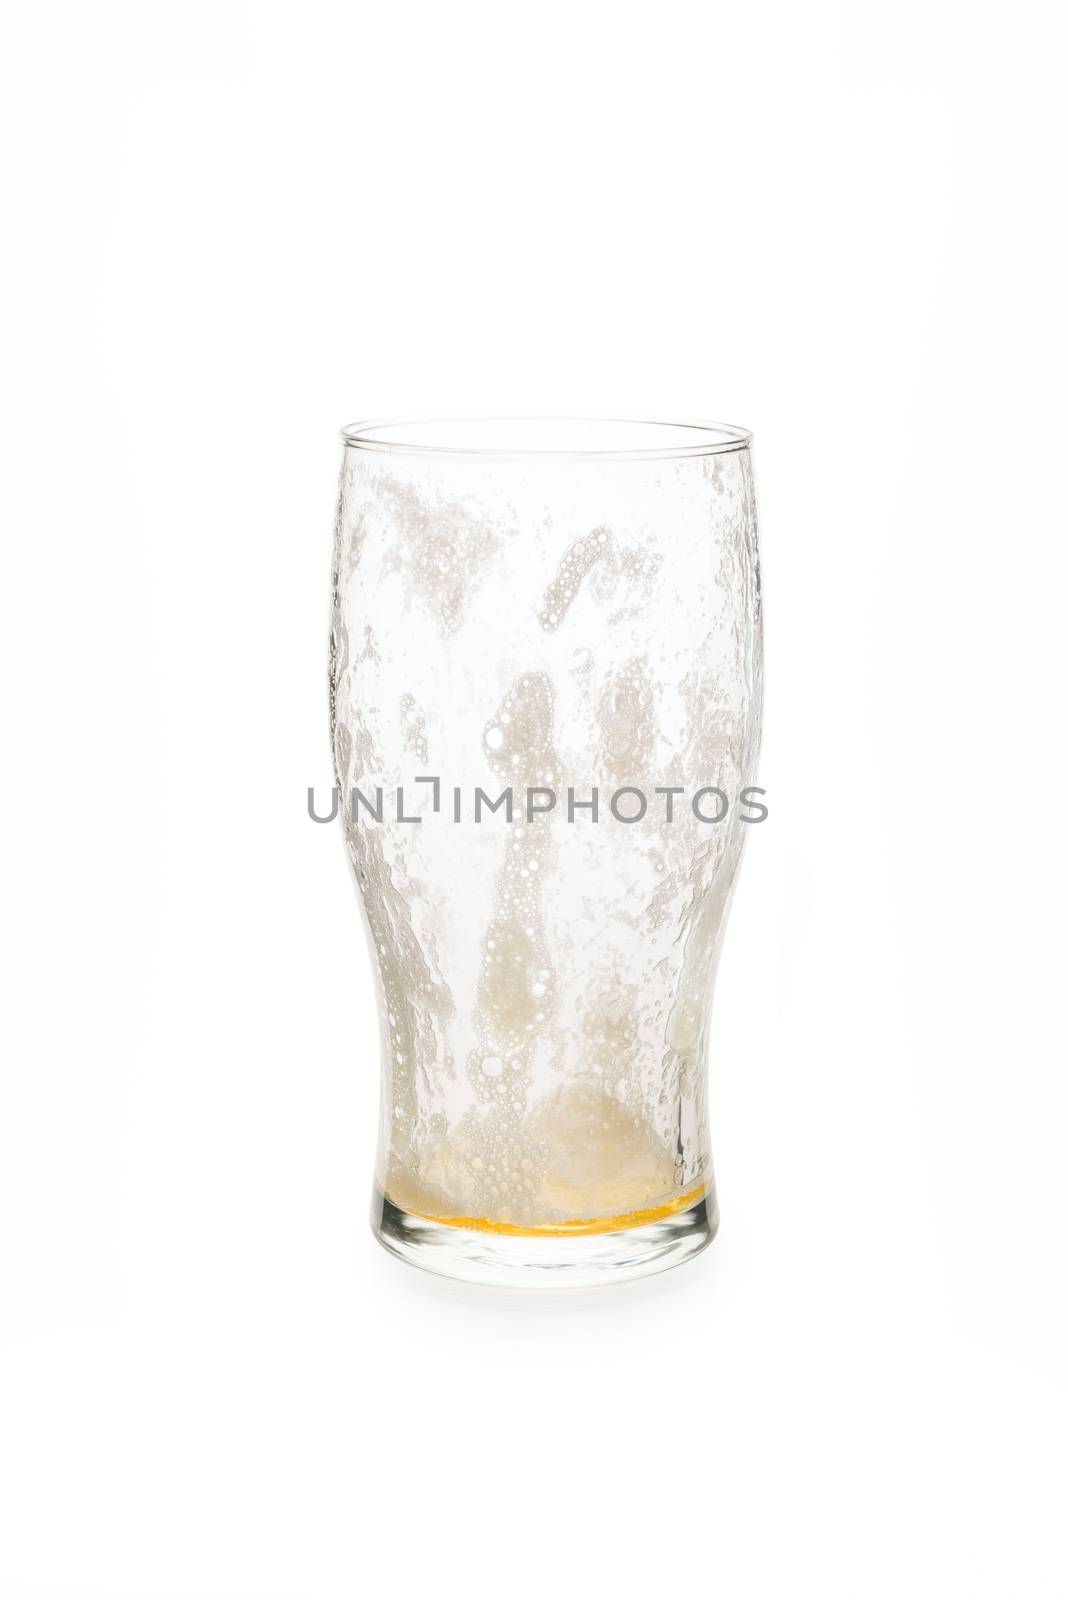 Empty pint glass with foam on the inside.